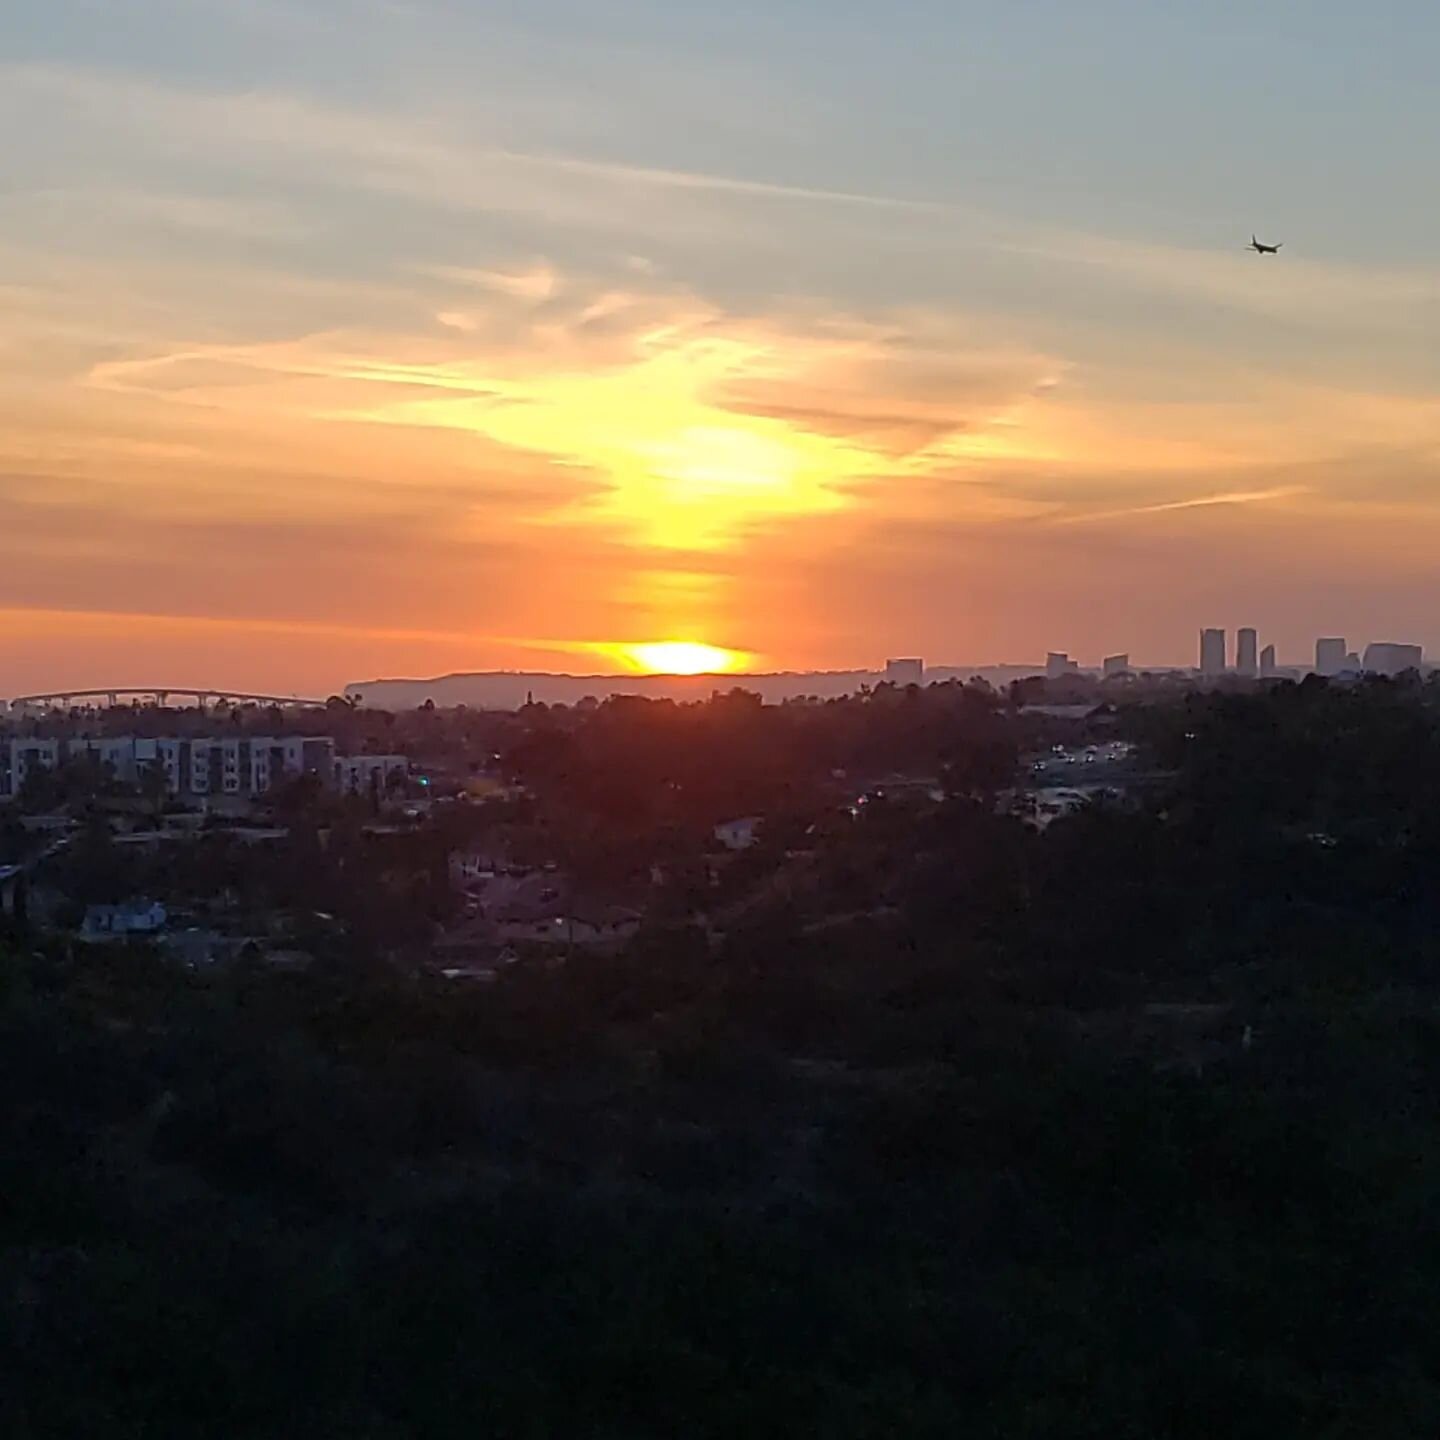 Another beautiful San Diego sunset. The Coronado Bridge to the left and see if you can find the plane. Love this city by the bay. 
.
.
.
.
#livingourjourney365 #nomadicroadtravels #homeonwheels #rvlifestyle #nomads #modernrv #rvtoday #fulltimervlivin